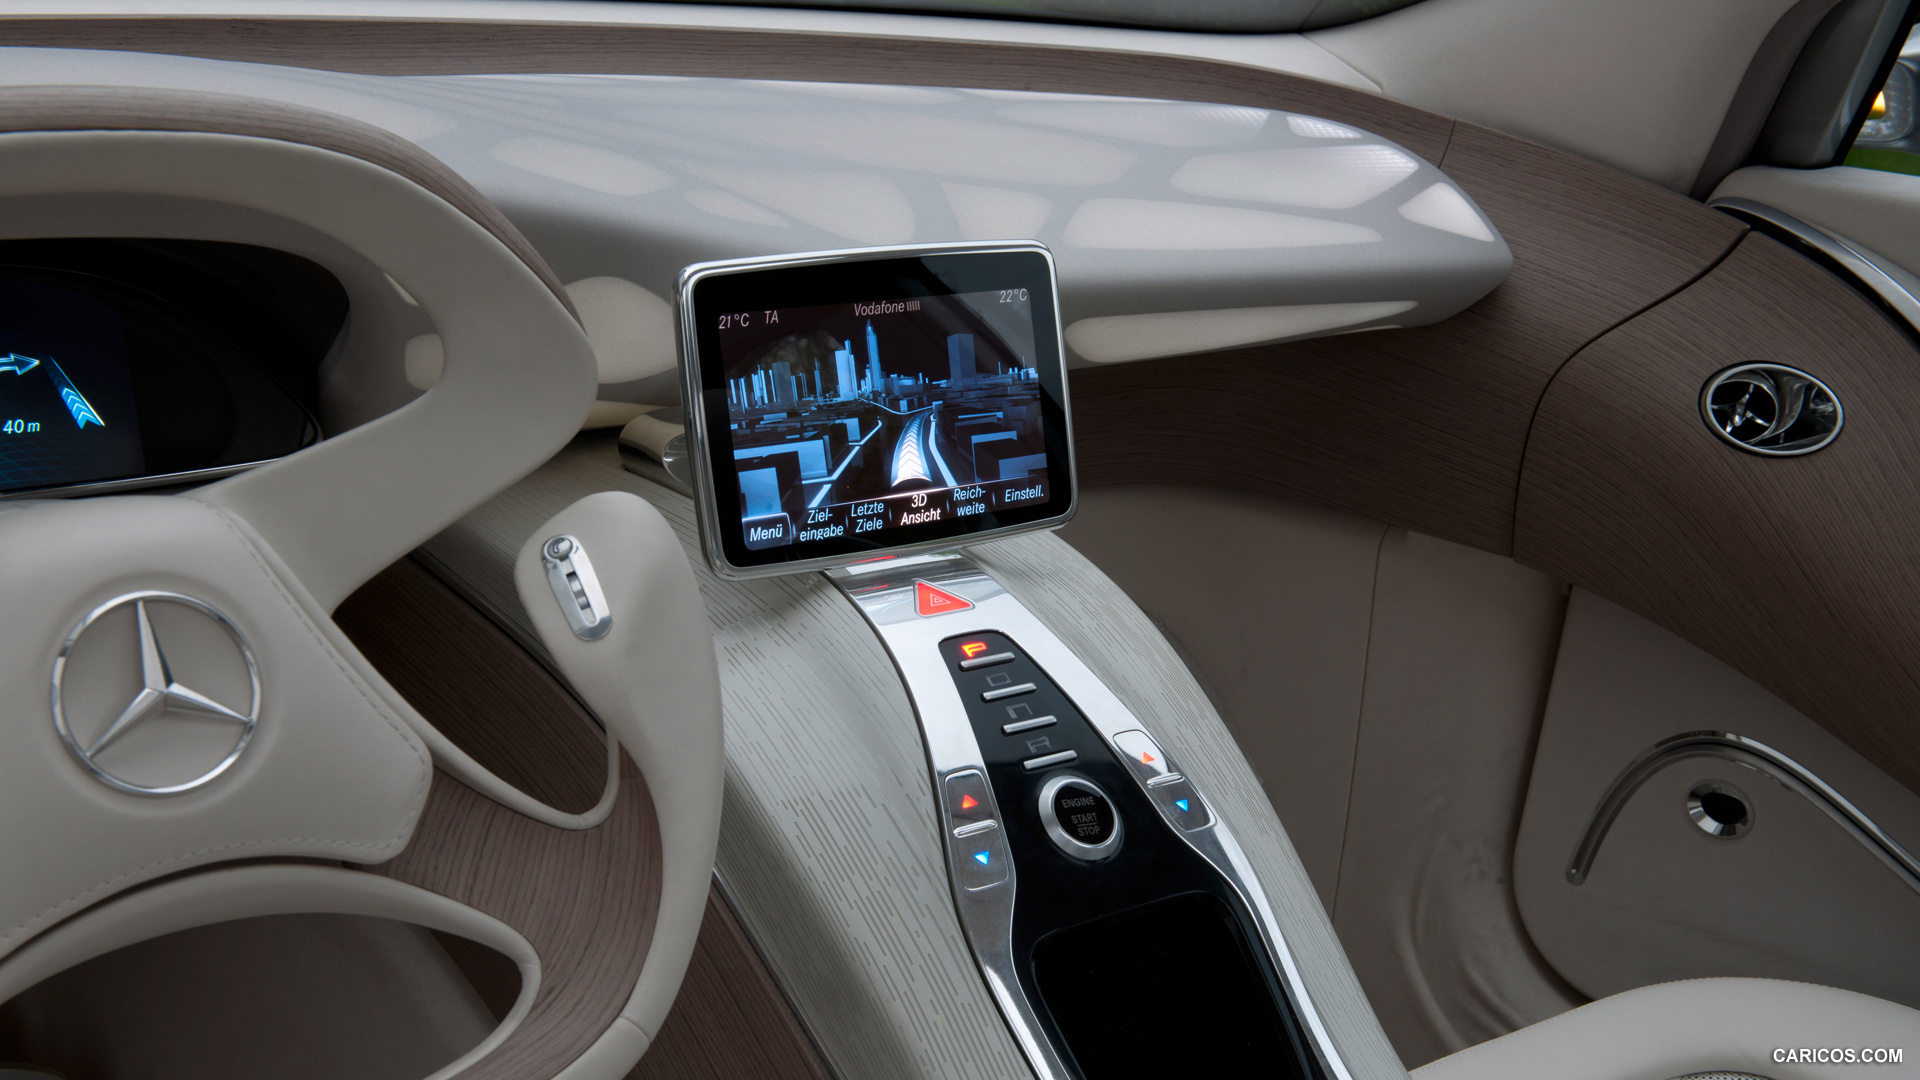 Mercedes-Benz F800 Style Concept (2010)  - Central Display, #95 of 120